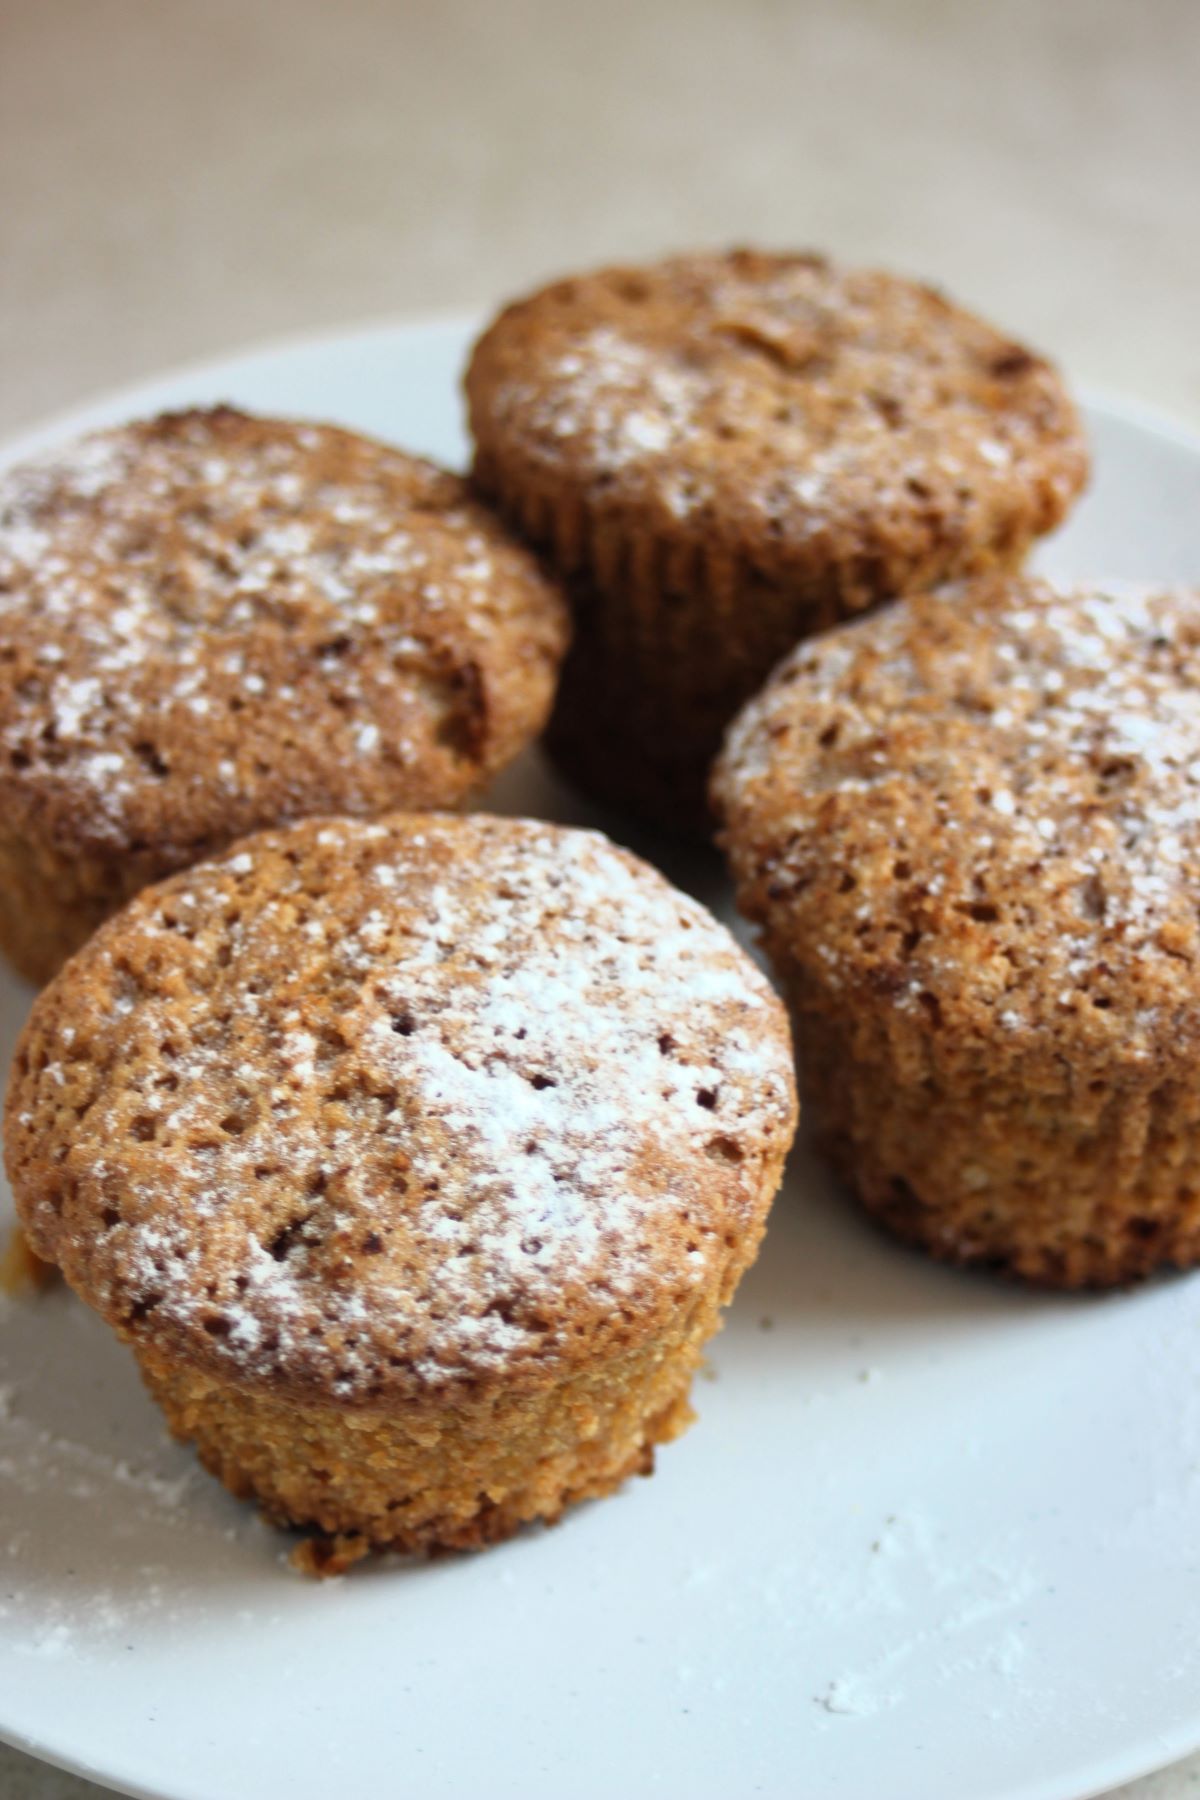 Four muffins with powdered sugar on a white plate.